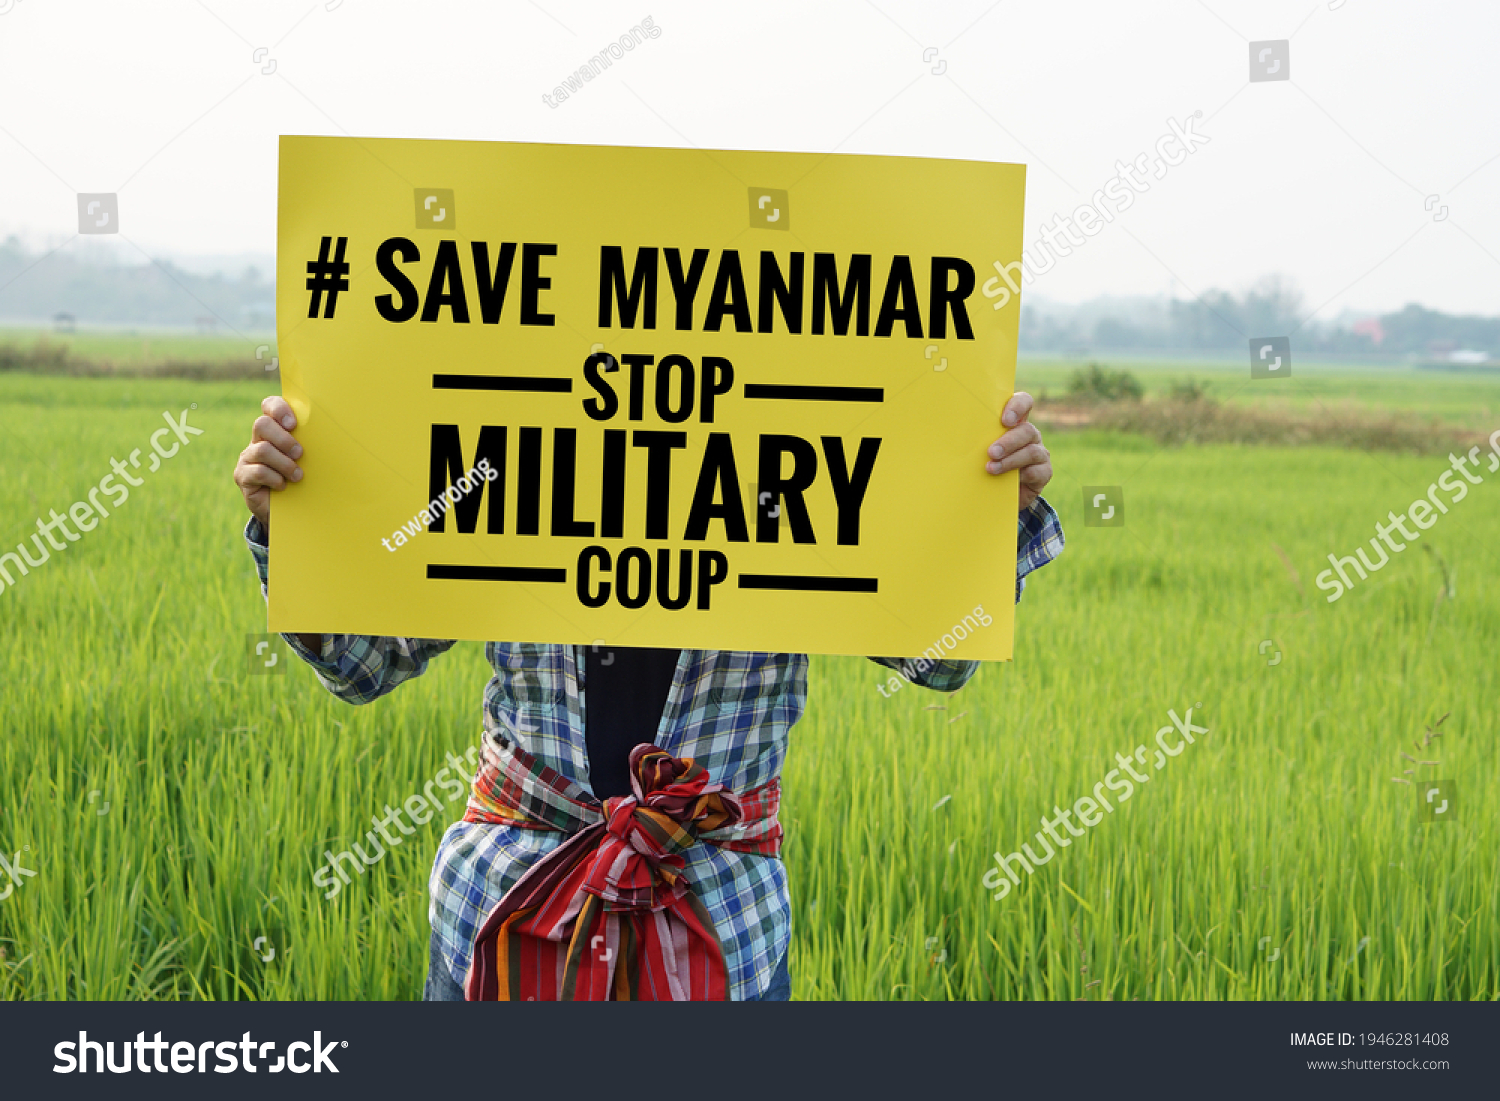 Text "#Save Myanmar stop military coup" on paper sign hold by a man at green paddy field. Concept protesting for democracy and against the coup in Myanmar. #1946281408